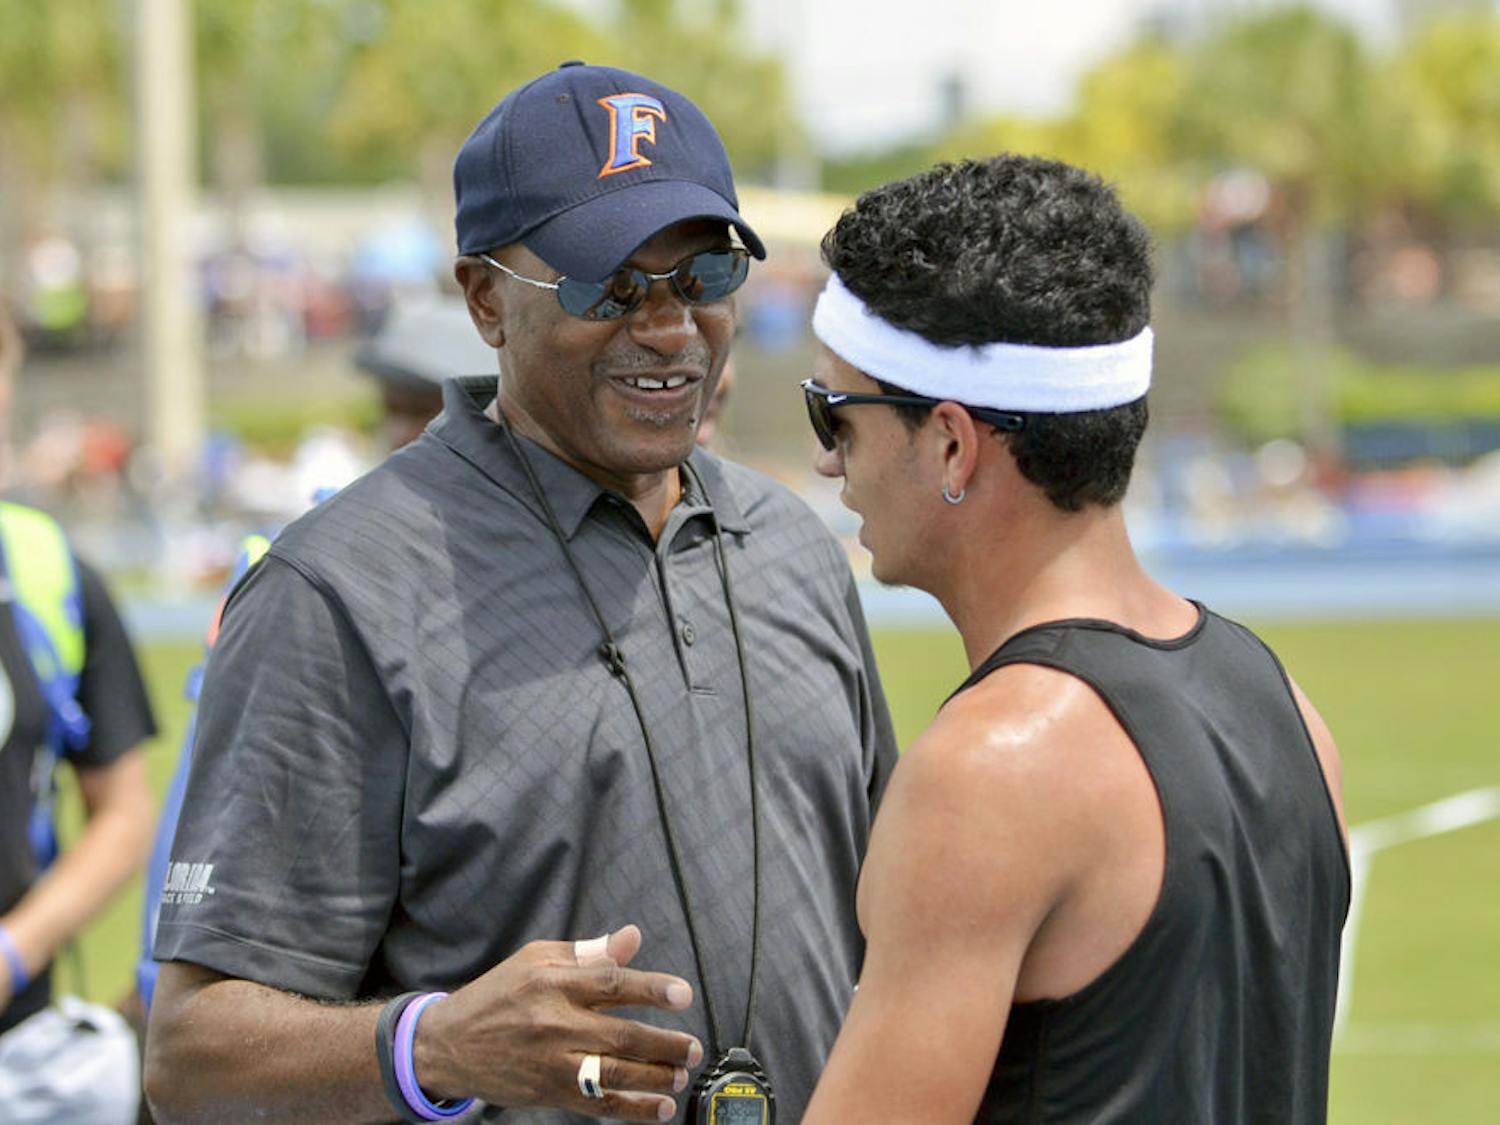 UF track and field coach Mike Holloway talks with mid-distance runner Andres Arroyo on the final day of the 2015 Florida Relays on Saturday at the Percy Beard Track.